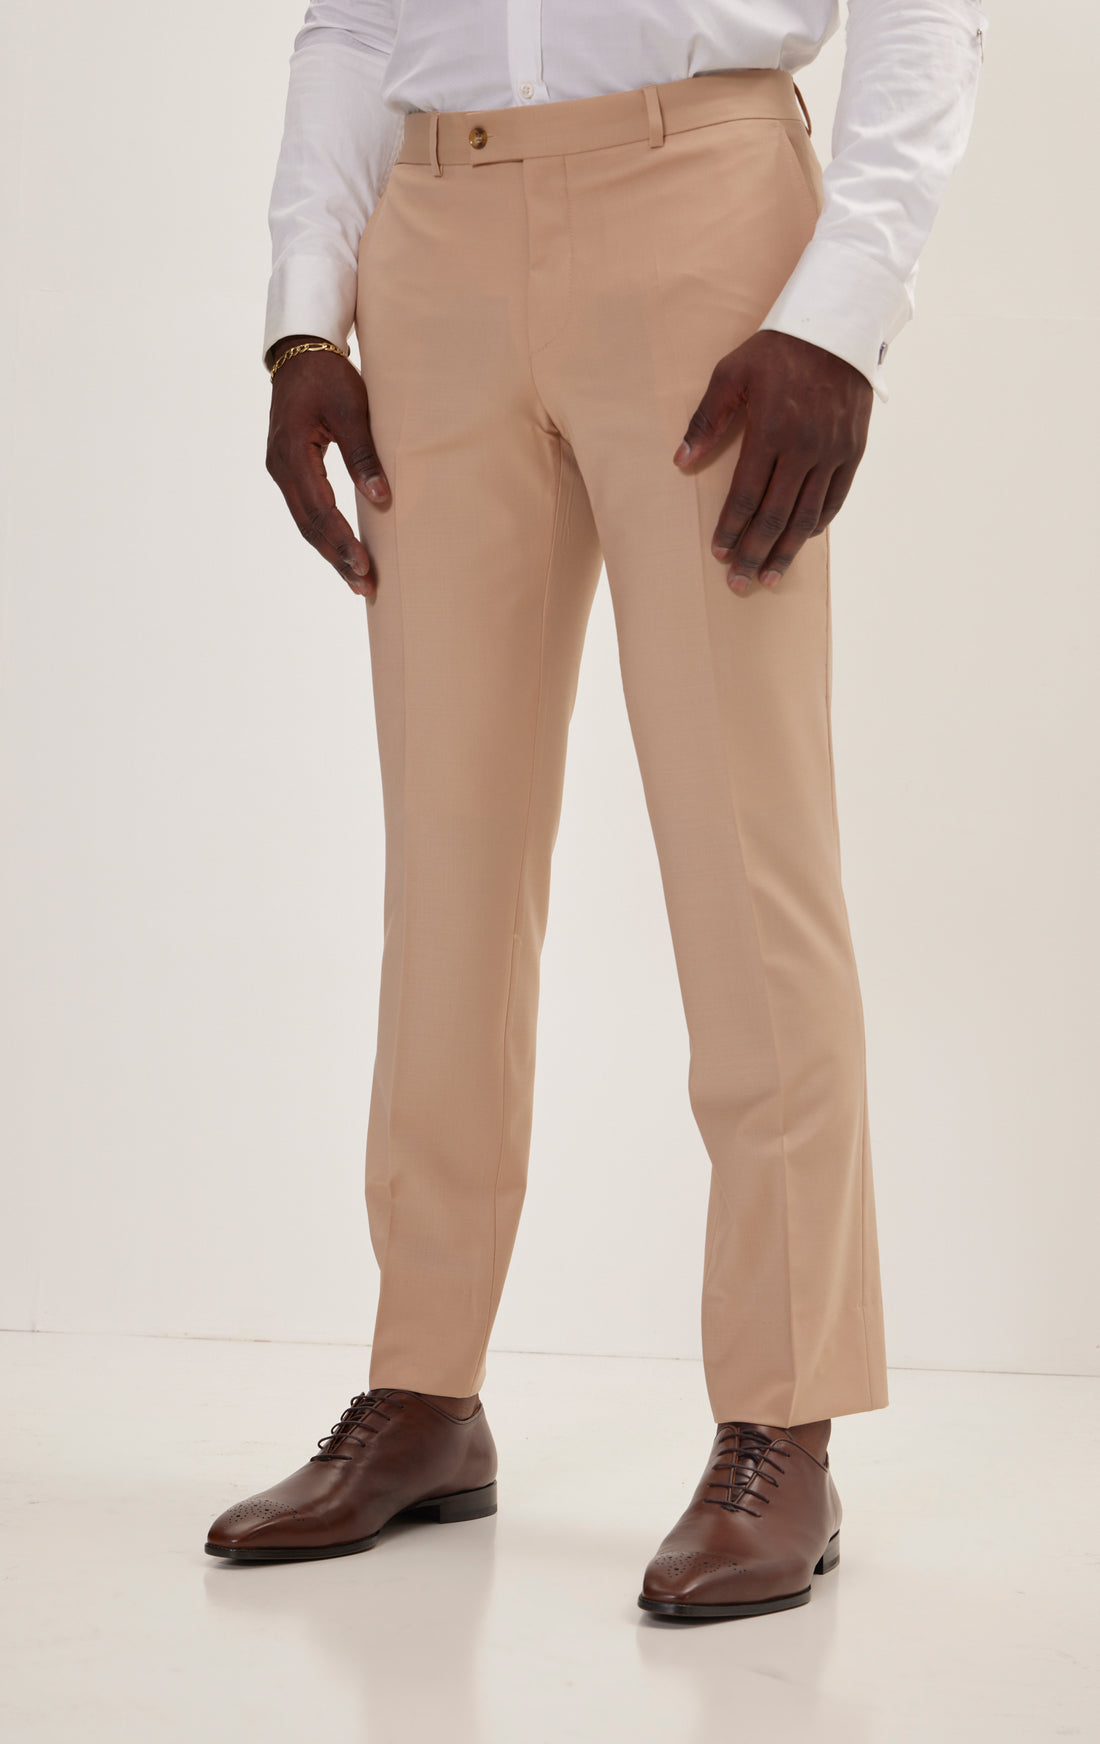 Super 120S Merino Wool Double Breasted Suit - Tan